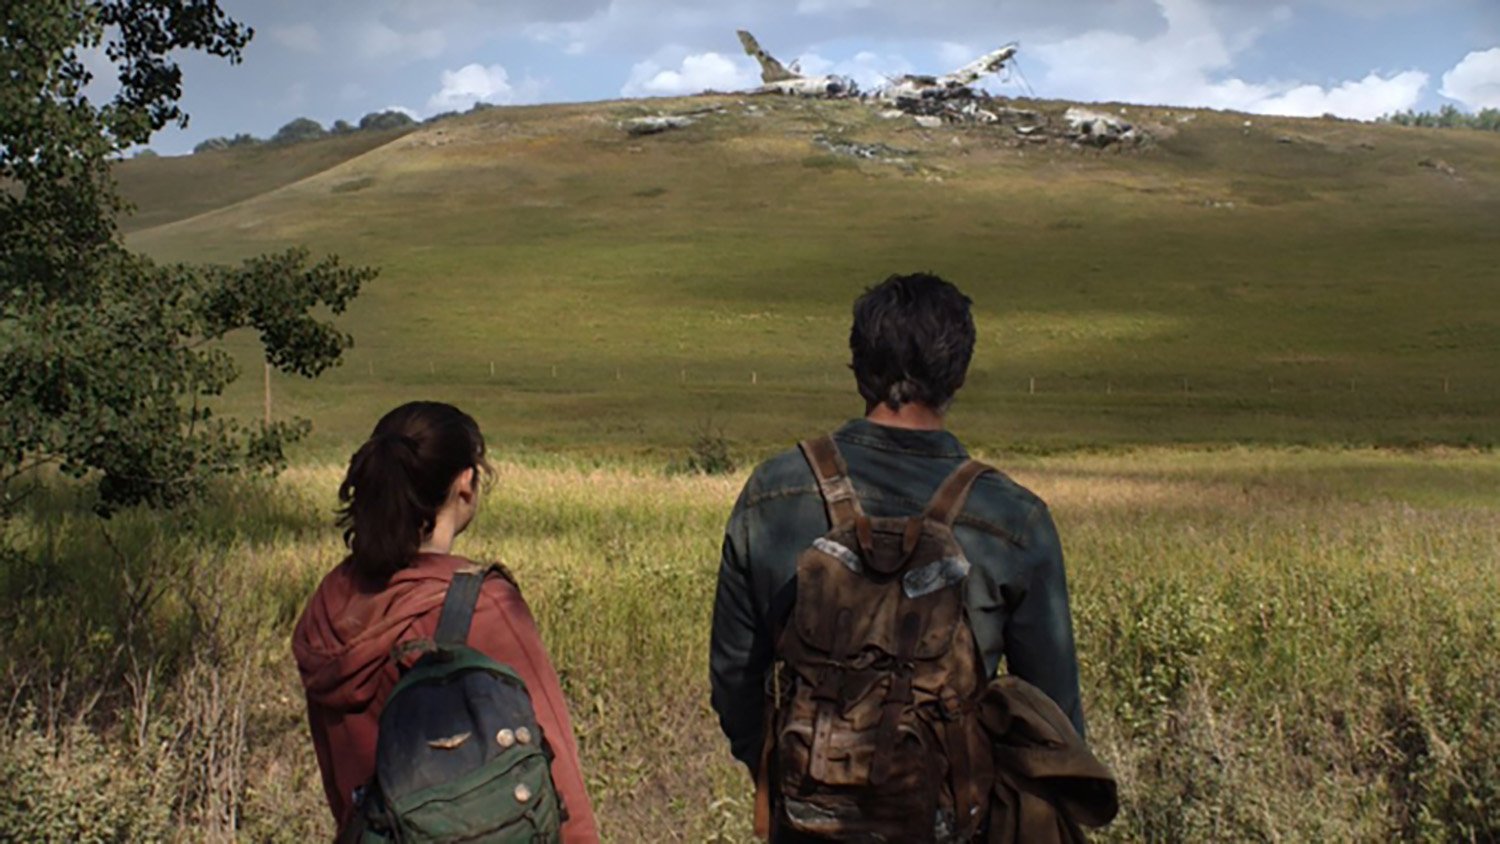 The Last of Us, Release date, cast and latest news